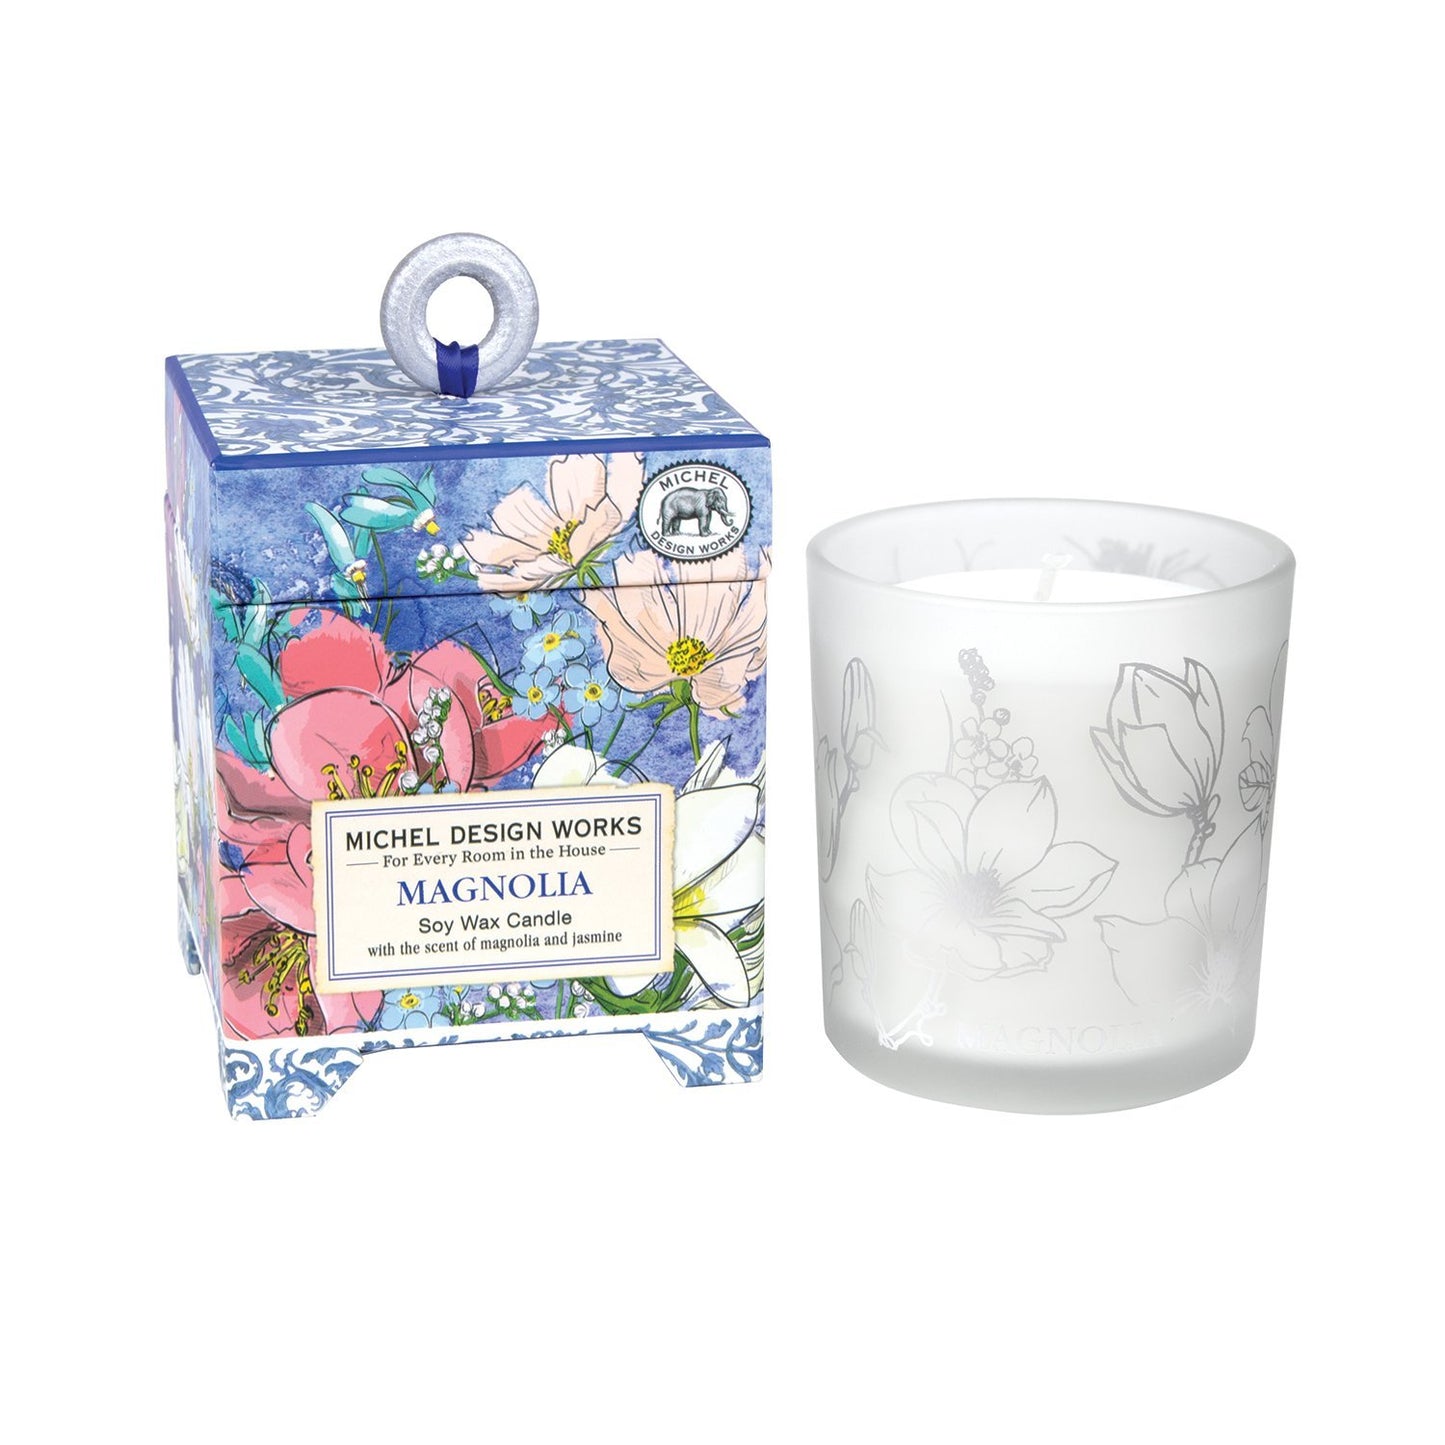 Magnolia 6.5 oz. Soy Wax Candle Elegant Floral Harmony in a Vibrant Design